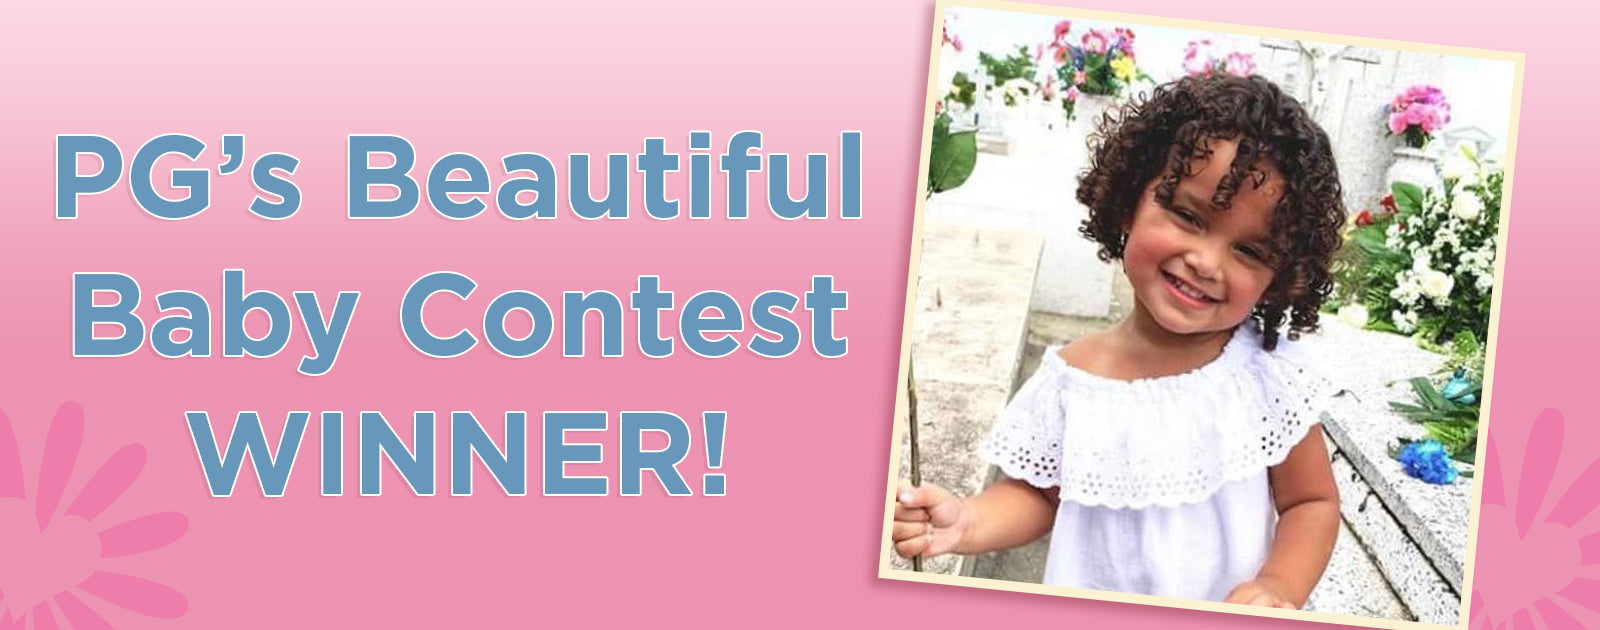 Paradise Galleries' Beautiful Baby Contest!  Banner